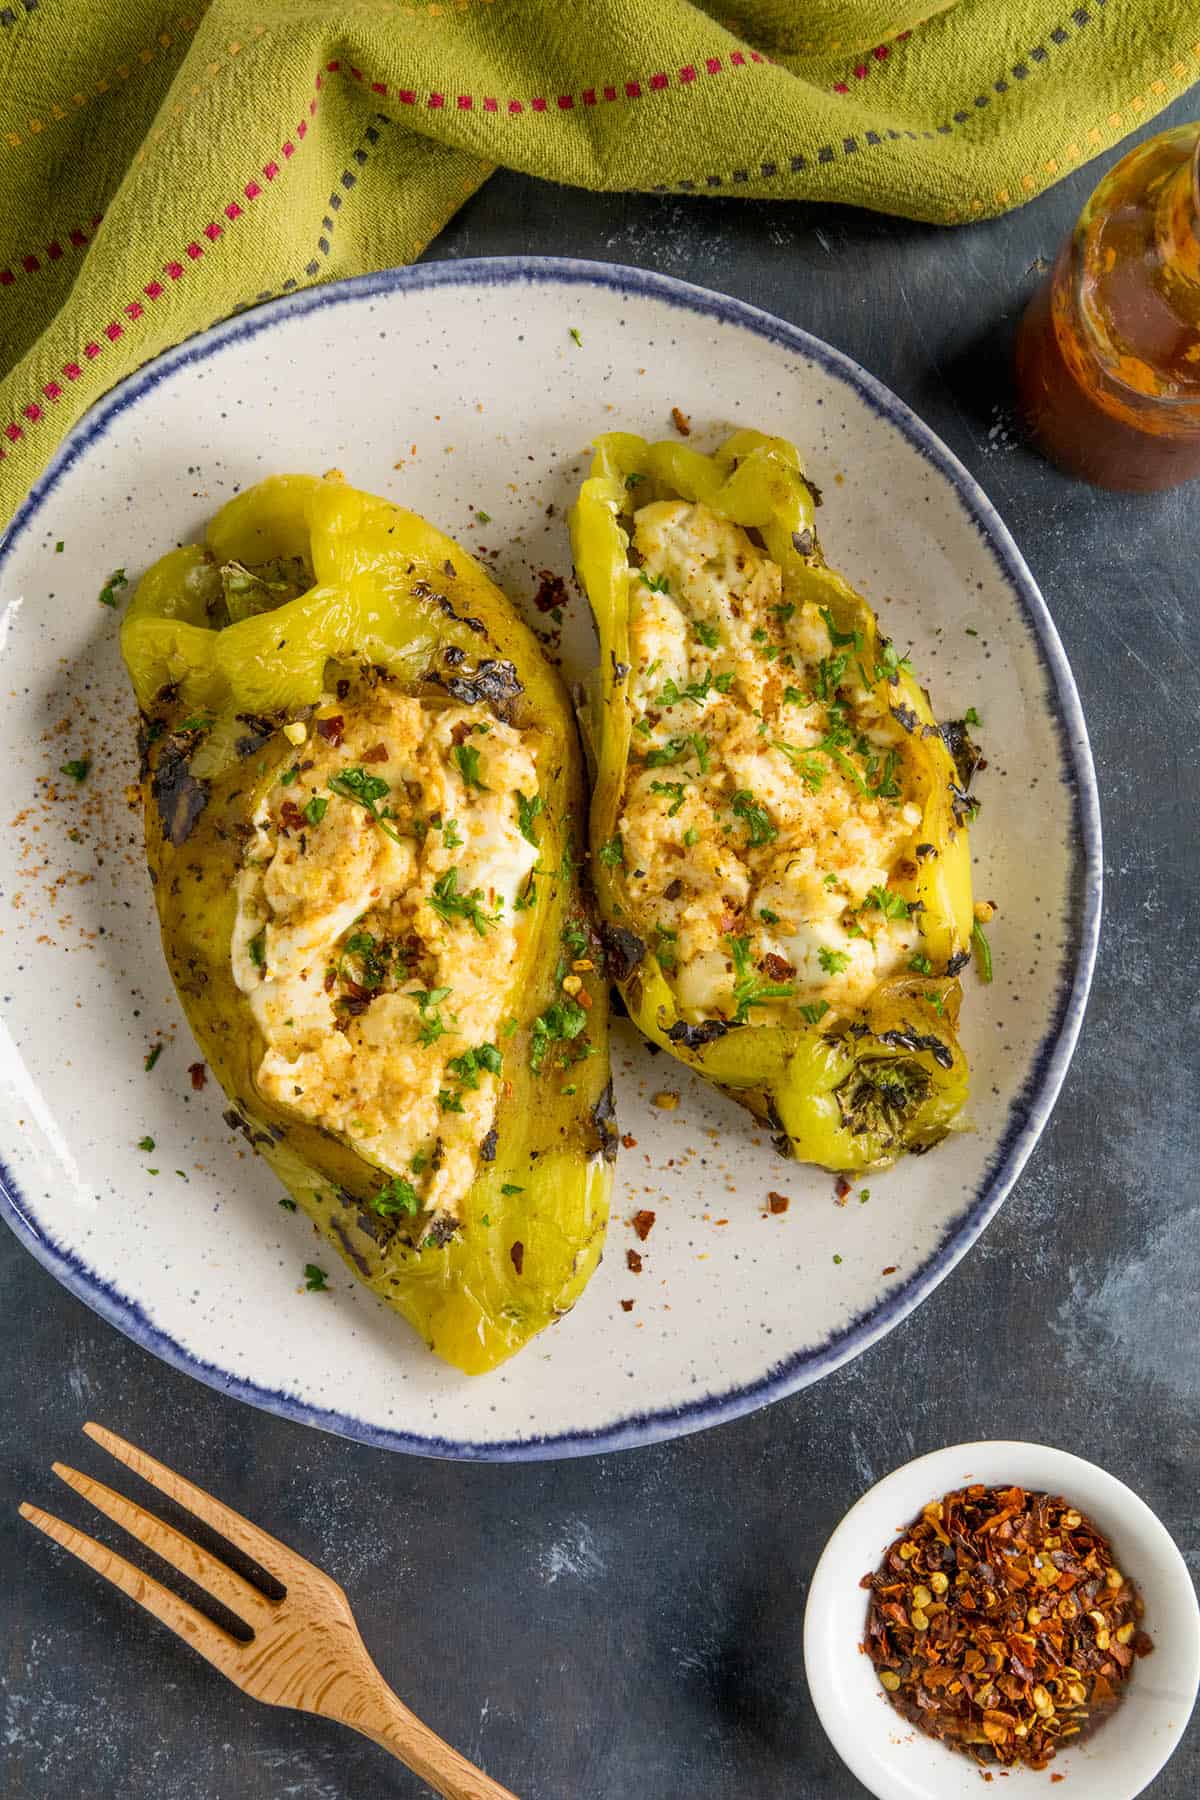 Cajun Cream Cheese Stuffed Anaheim Peppers - On a plate, ready to serve